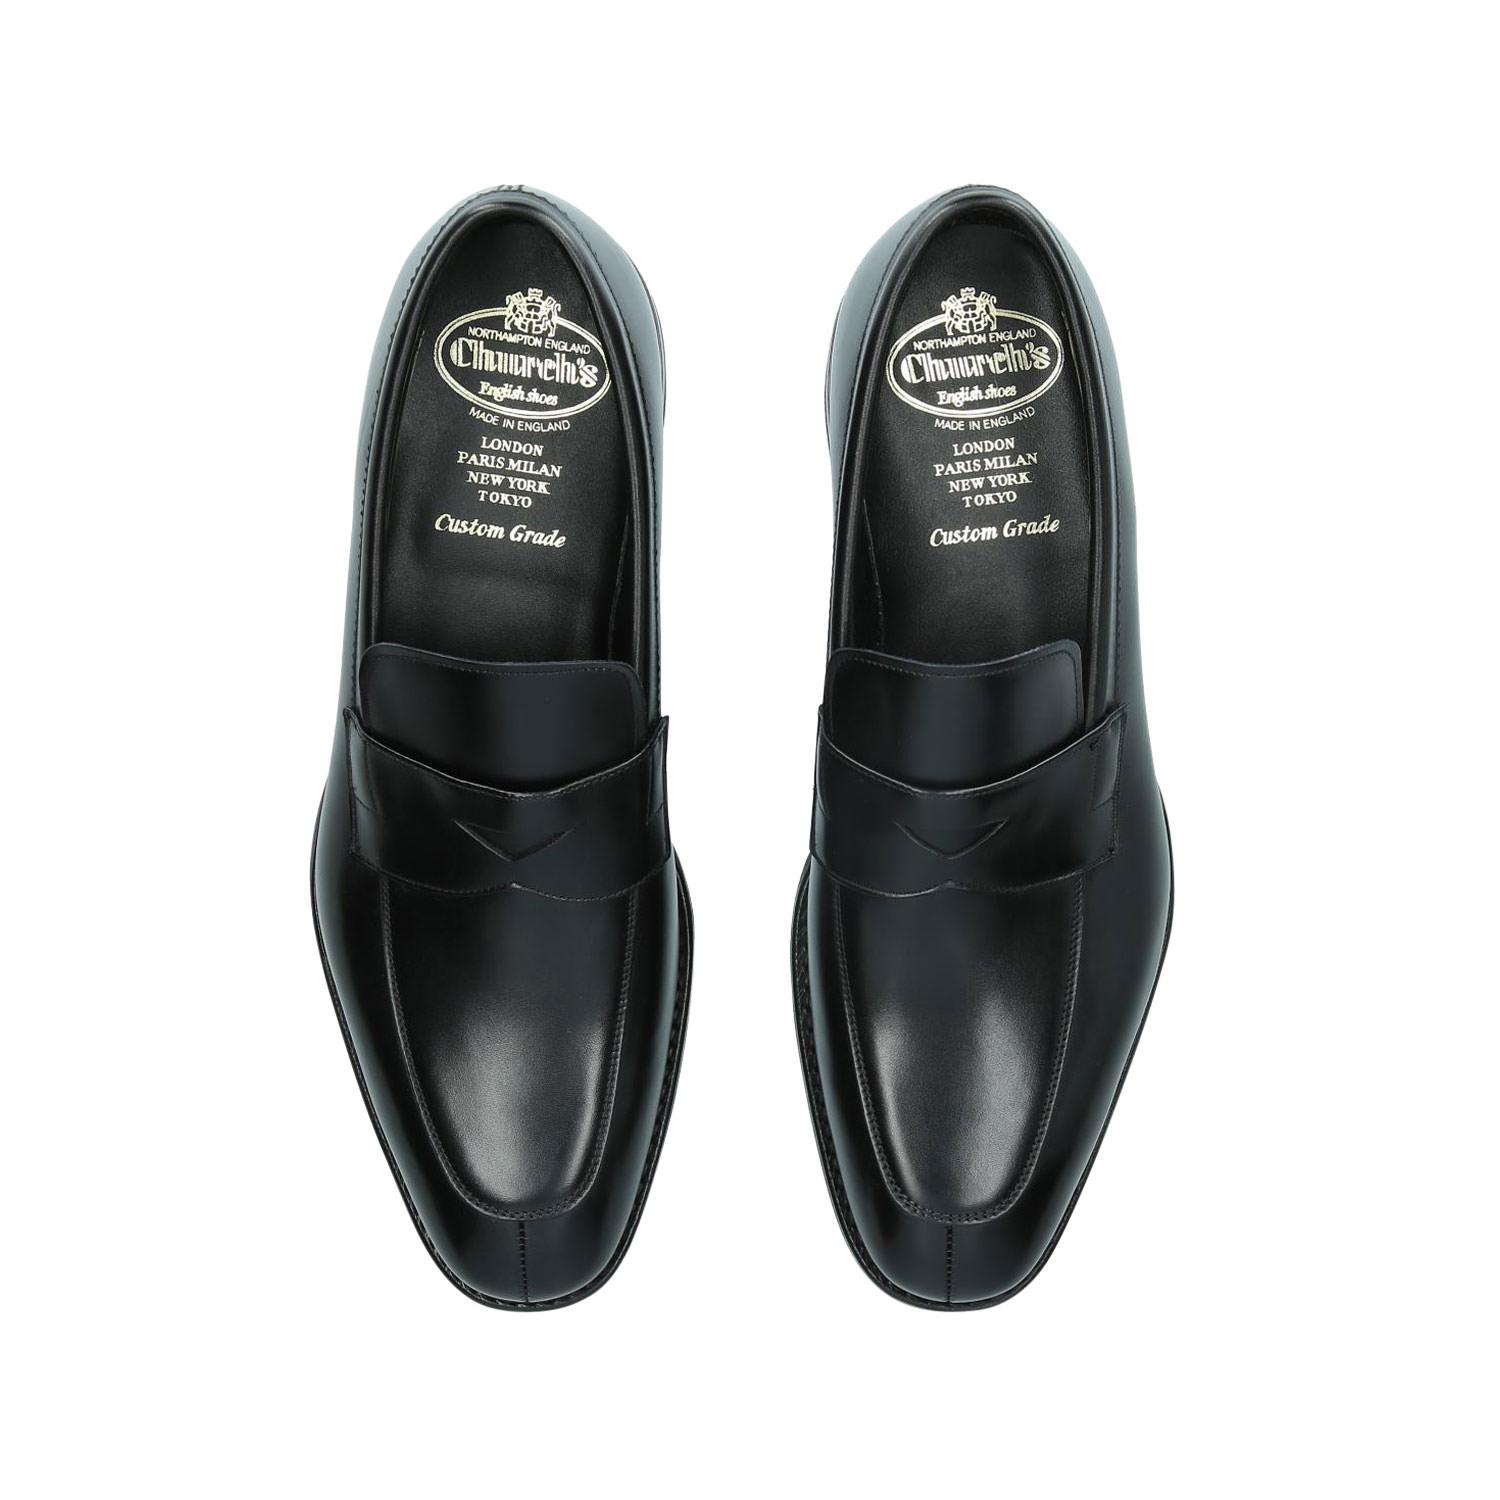 Parham Penny Loafers